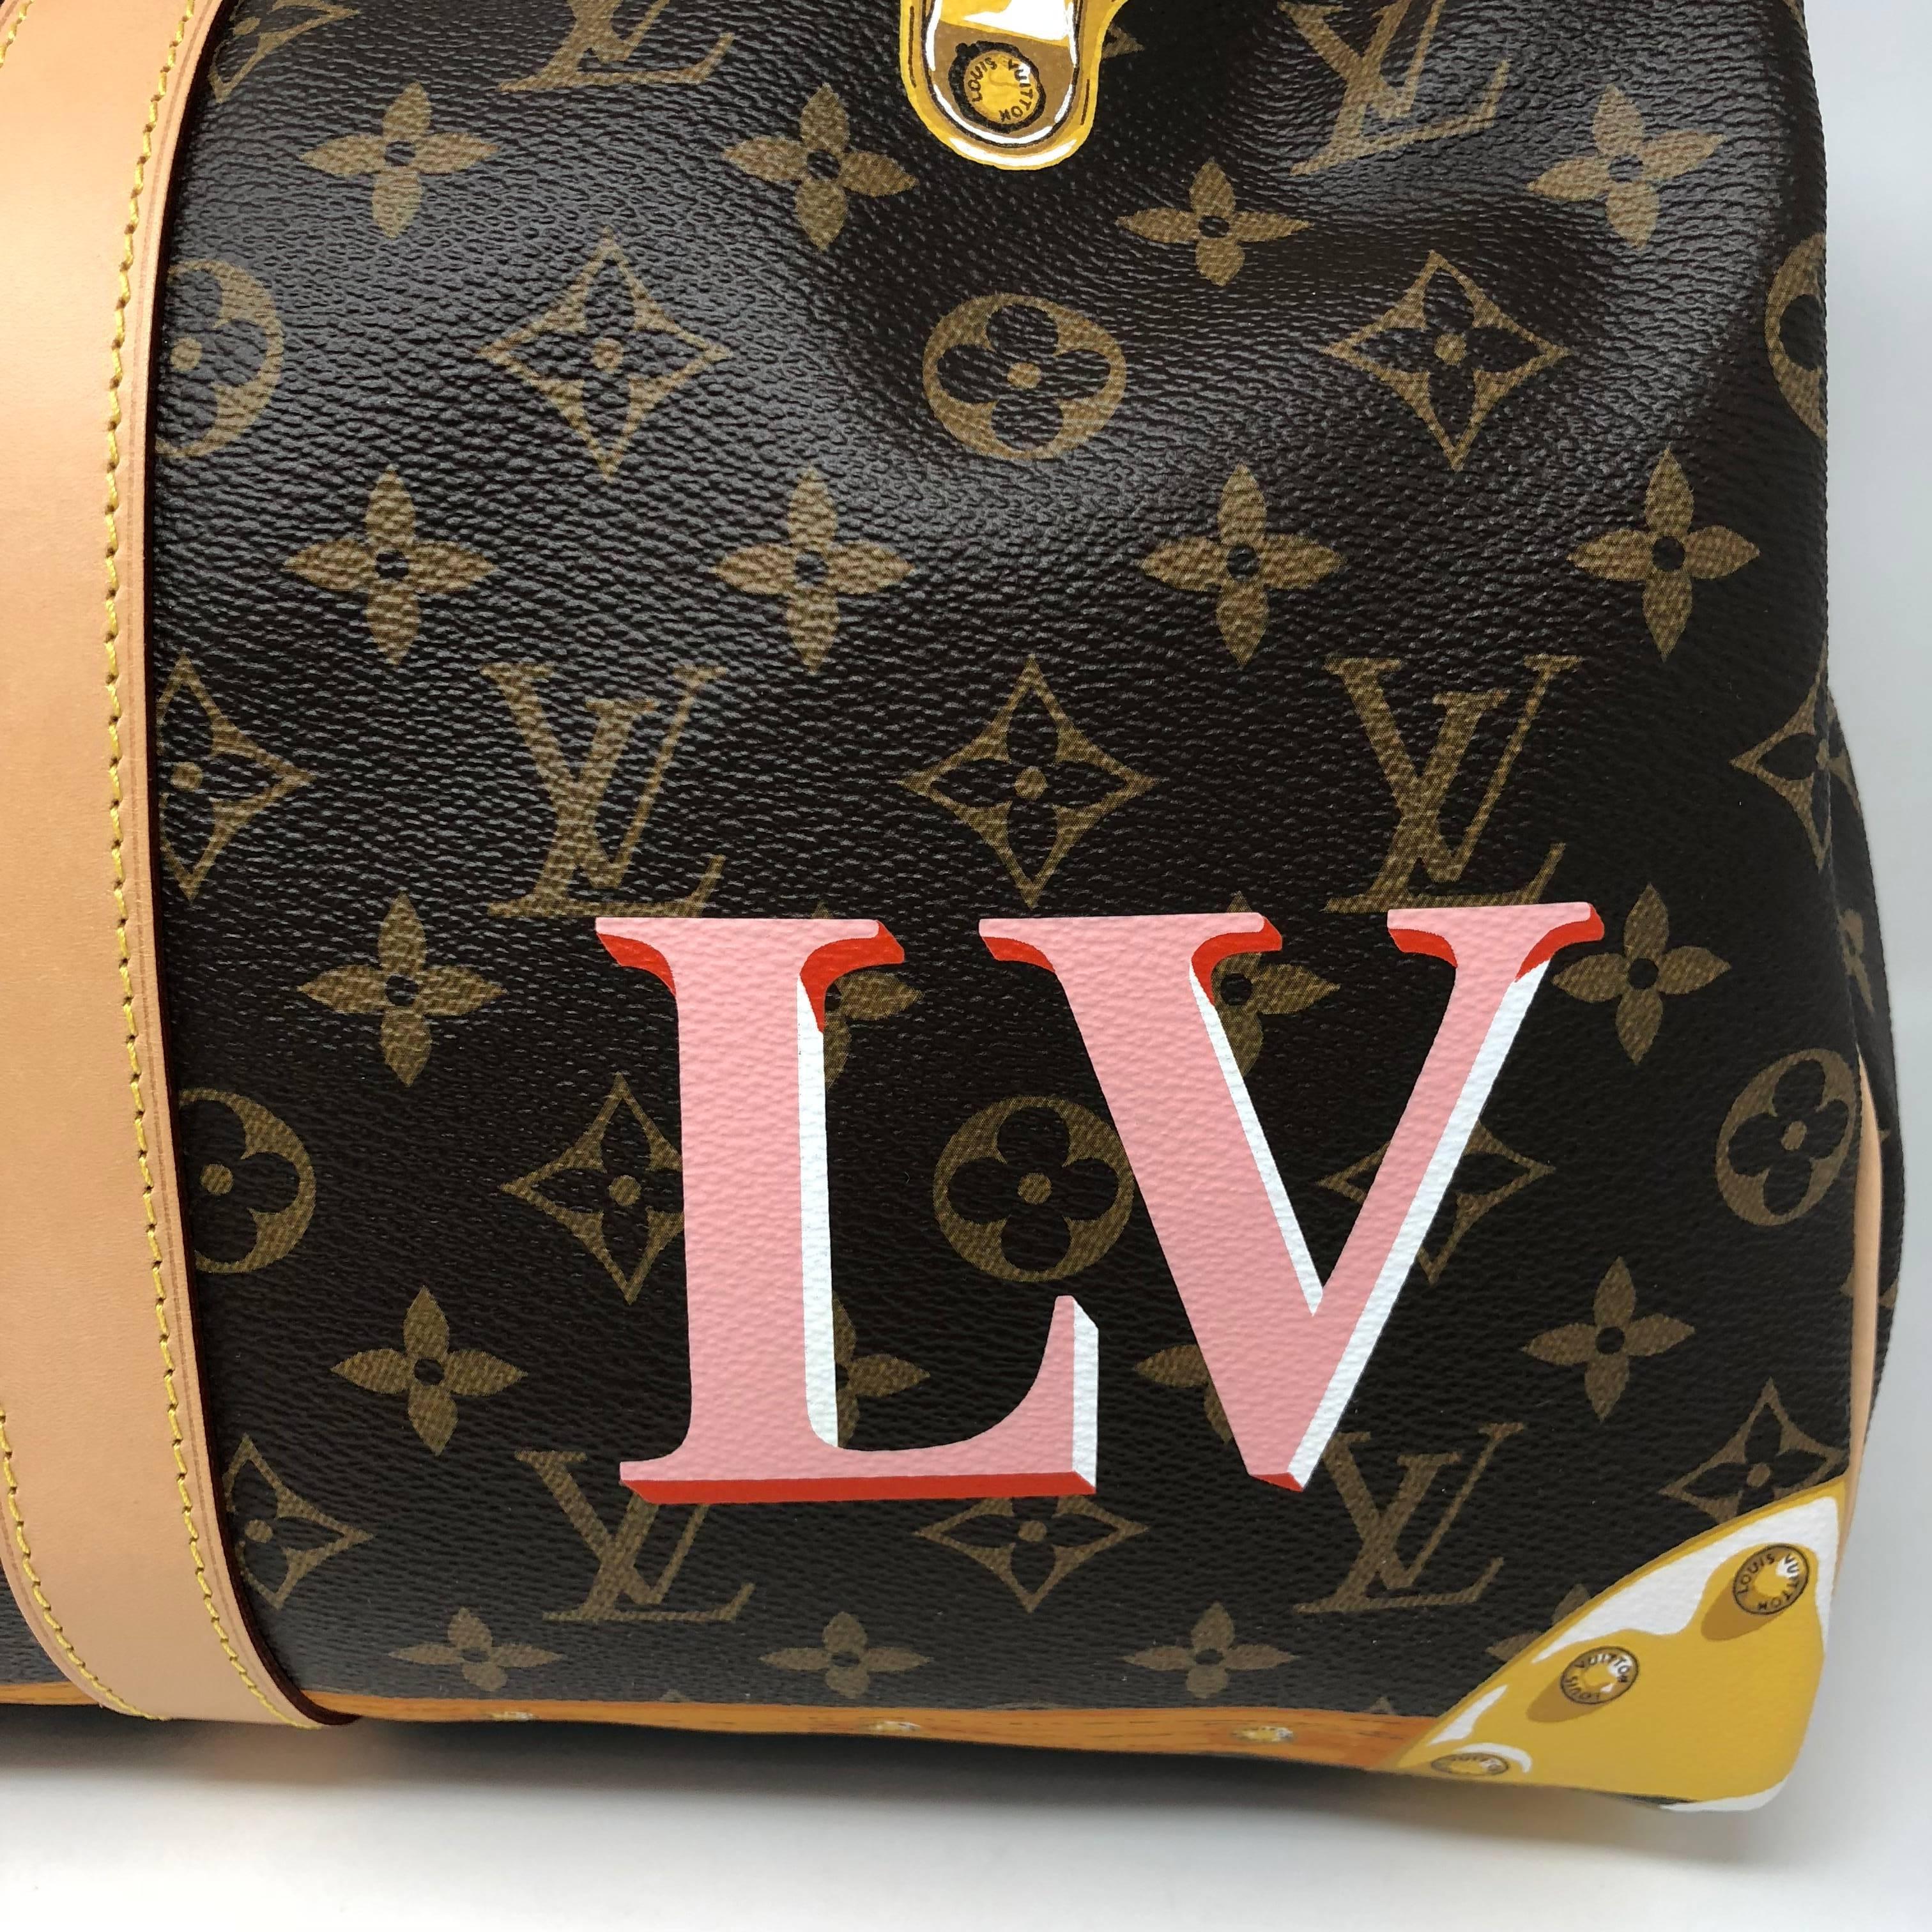 Black Louis Vuitton Keepall Limited Edition Trunks, 2018